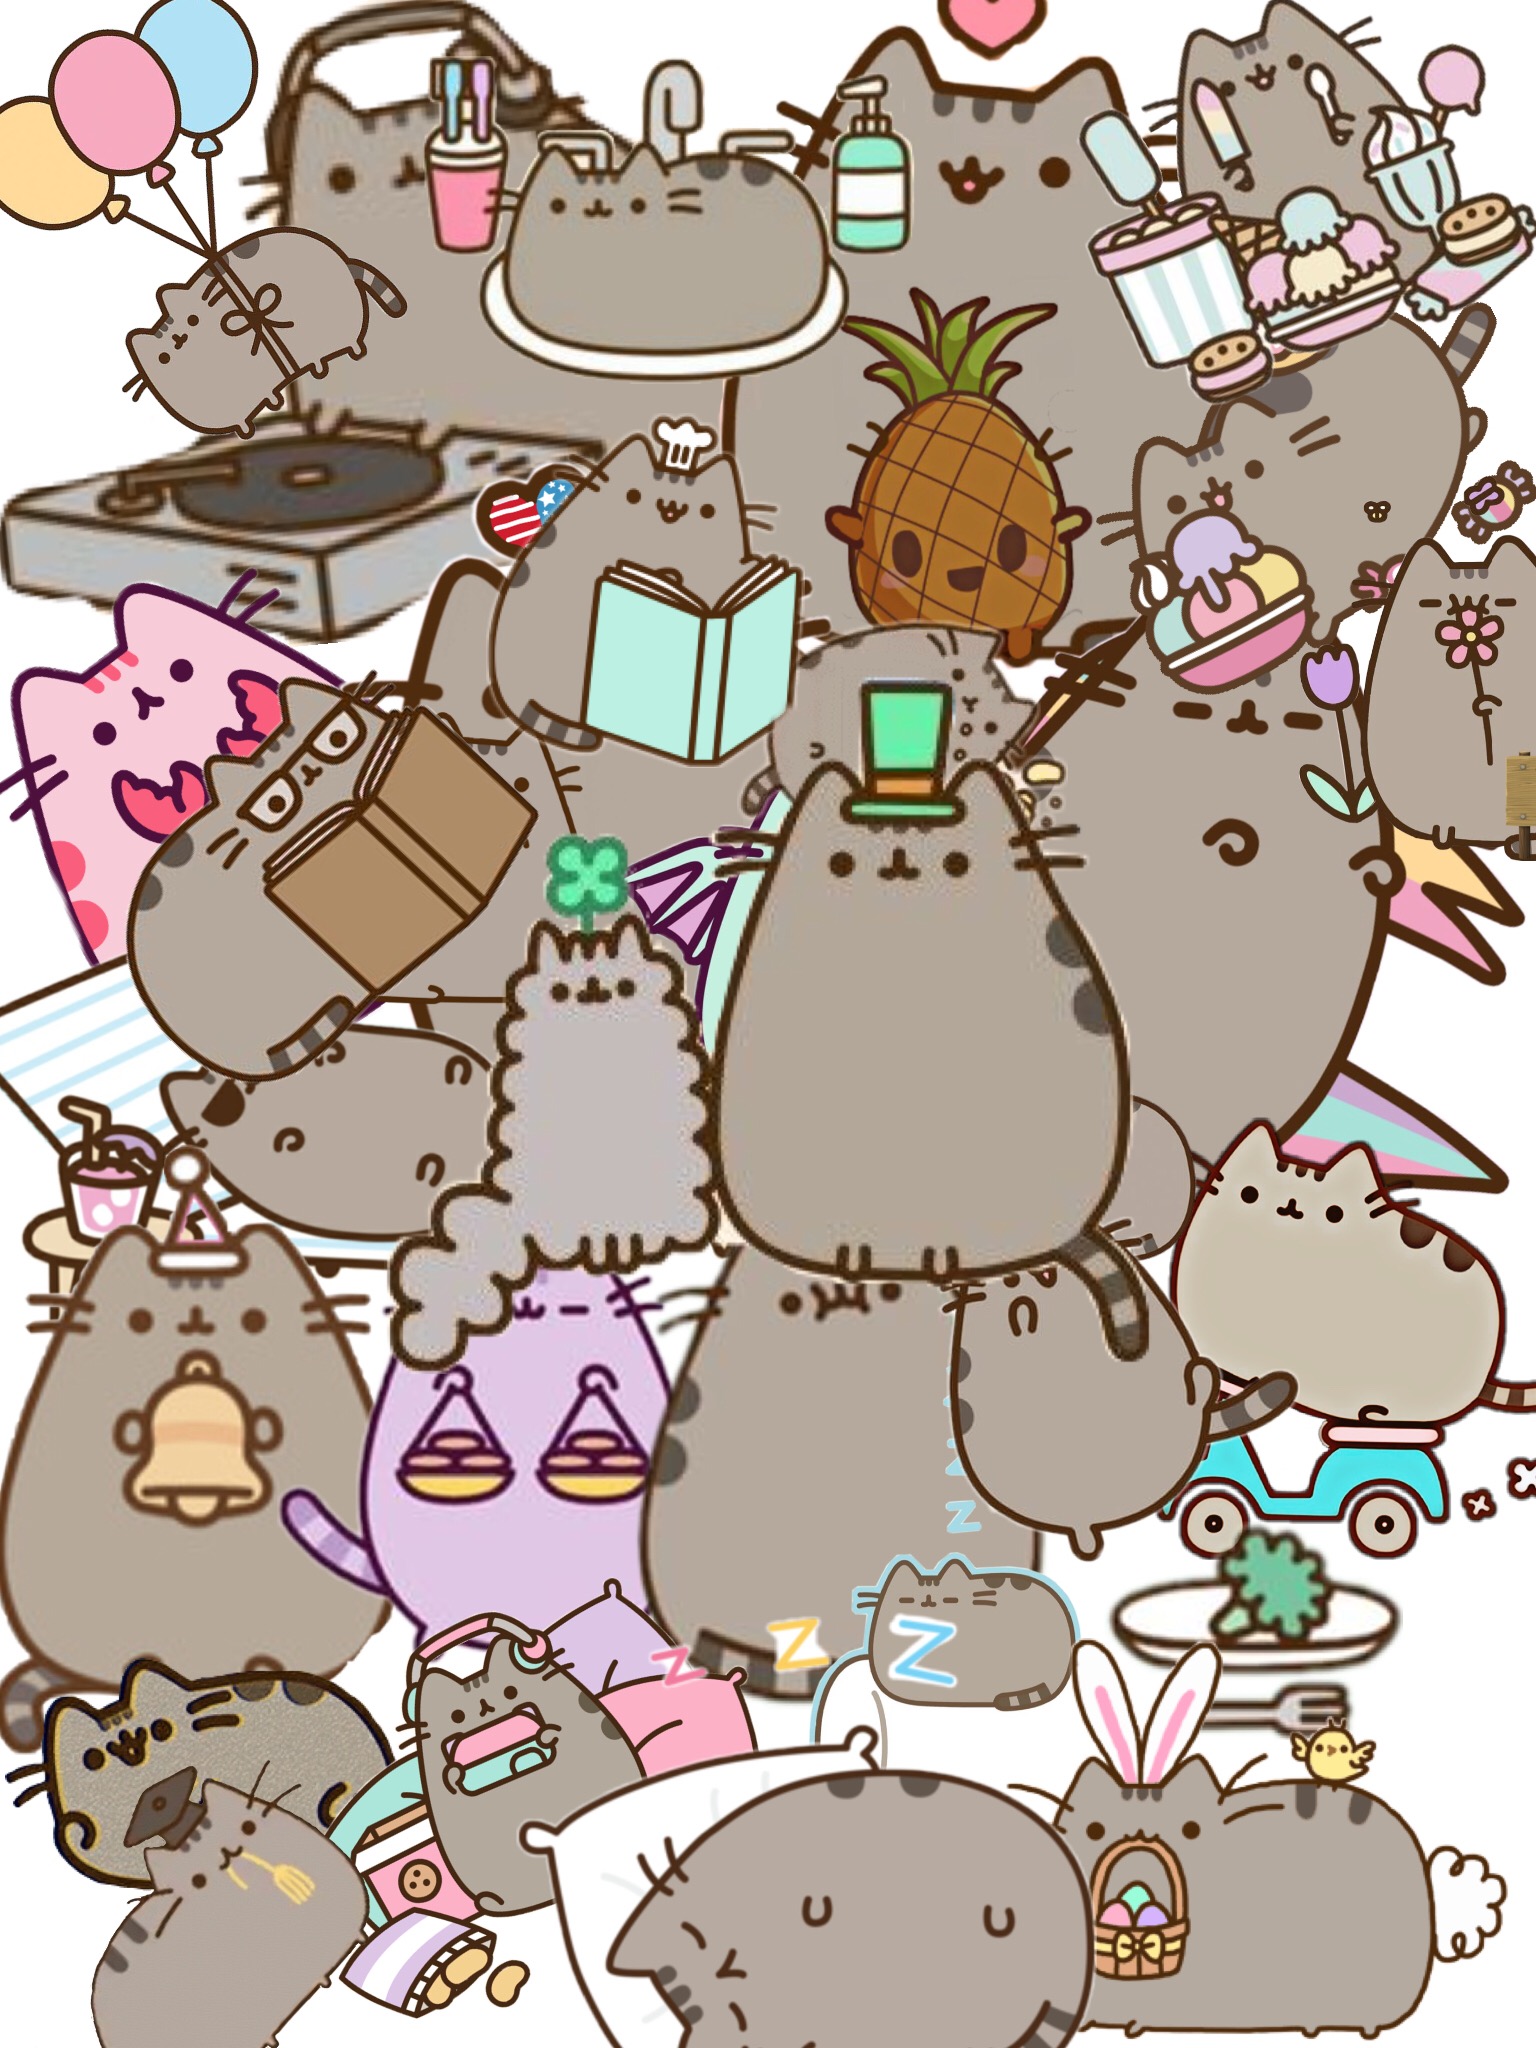 1000+ Awesome pusheen Images on PicsArt